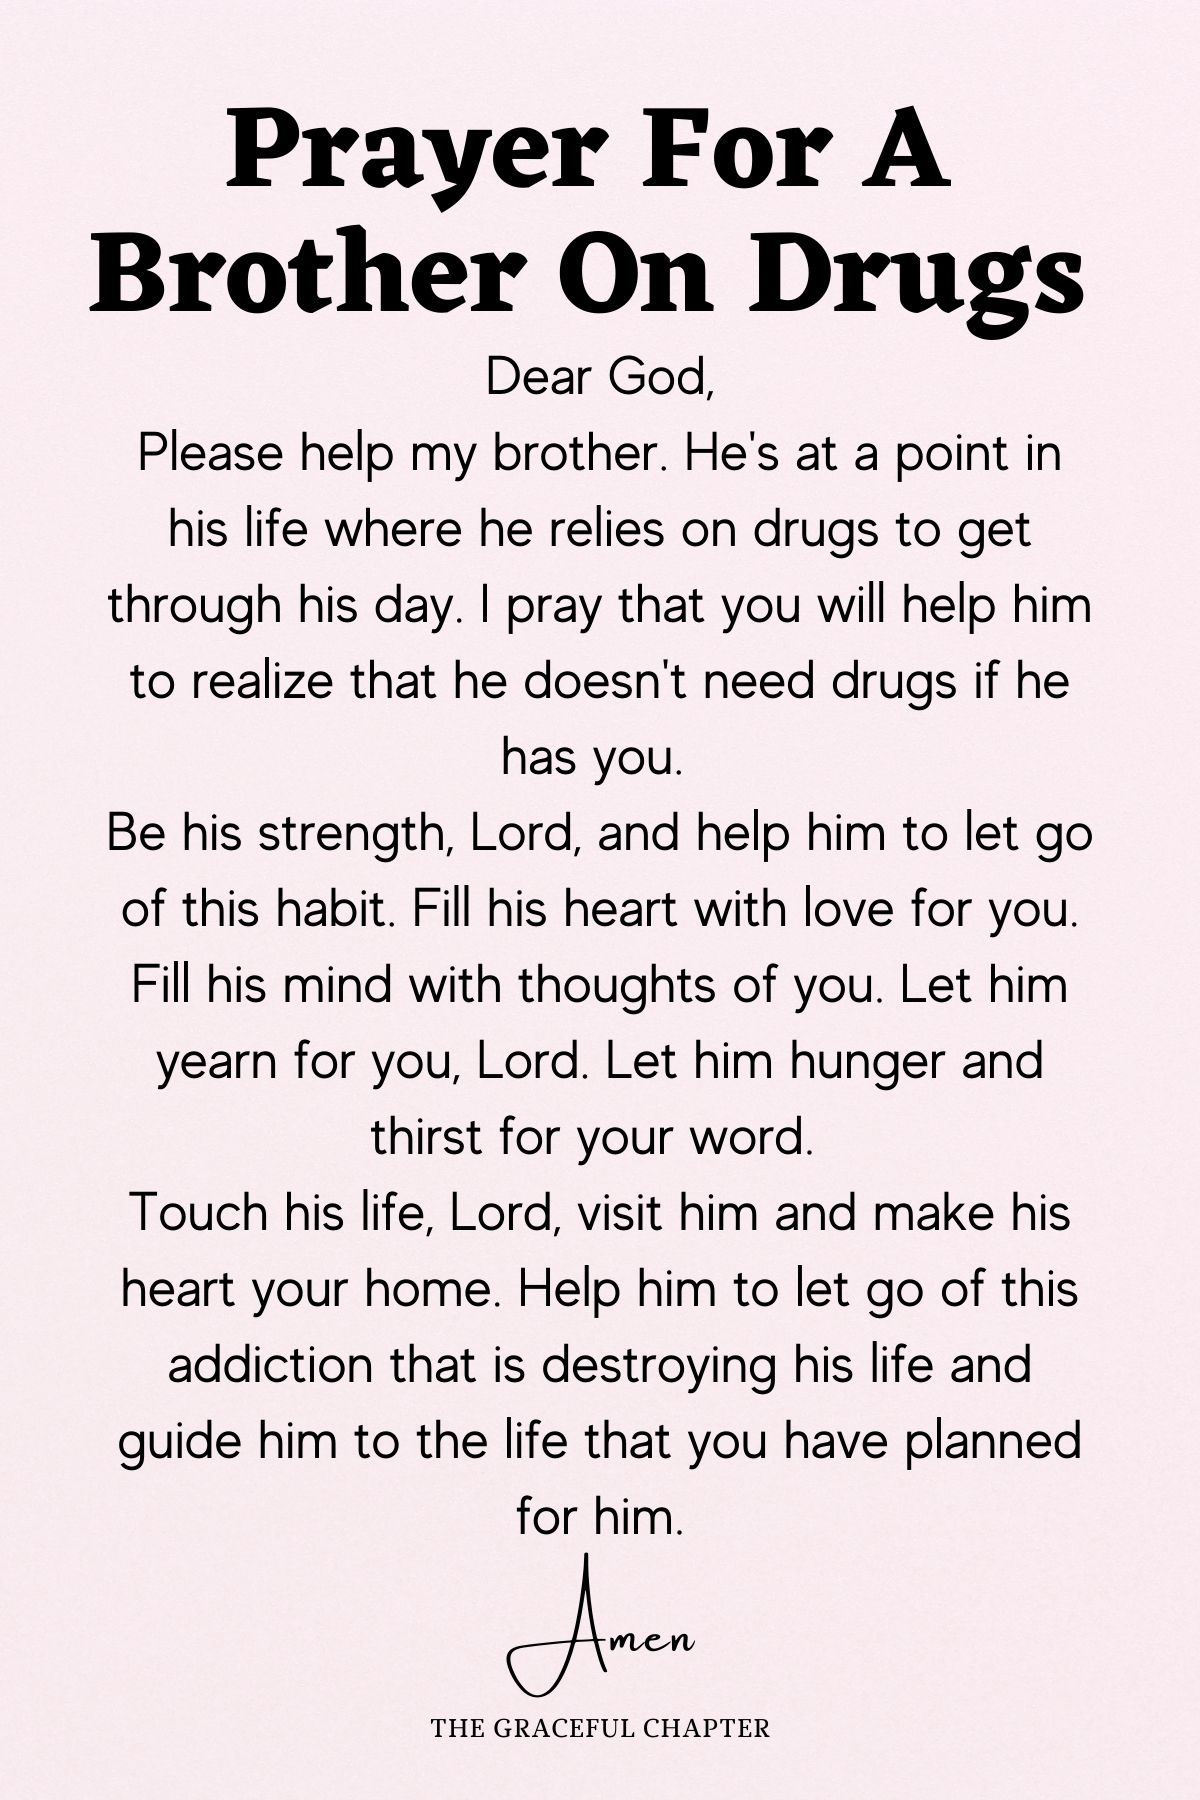 Prayer for brother on drugs